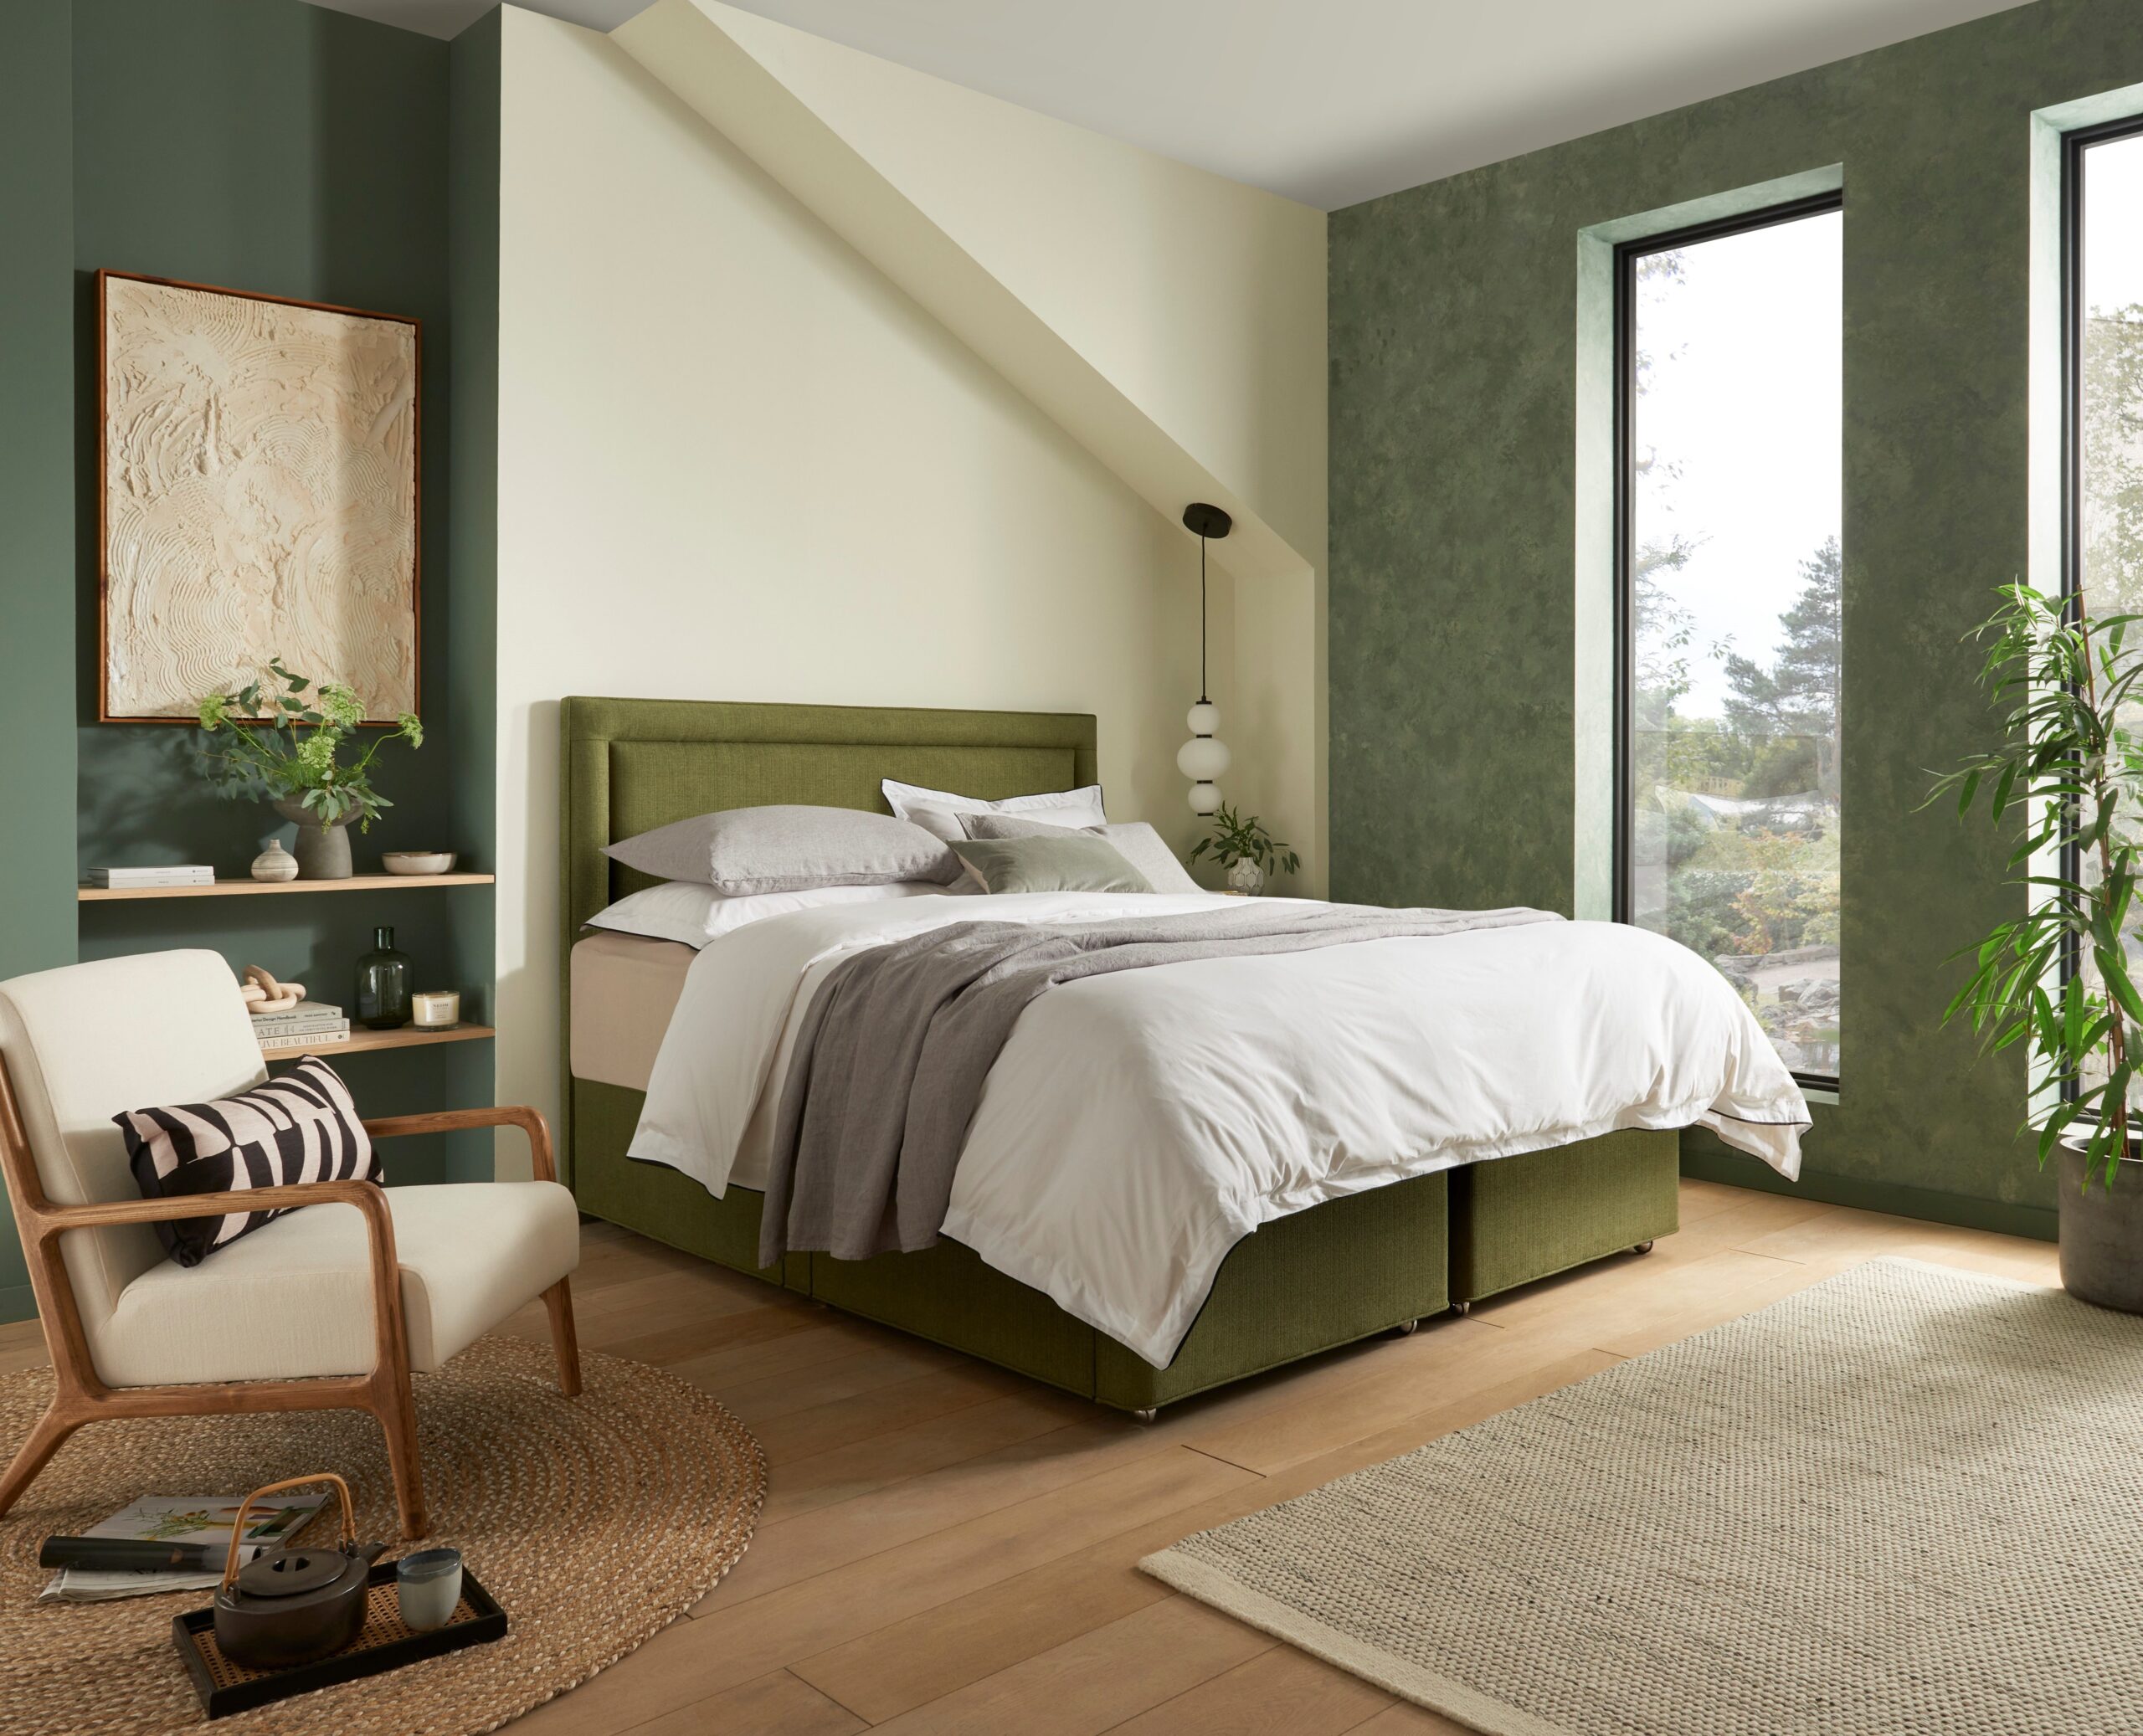 Hypnos olive green bed